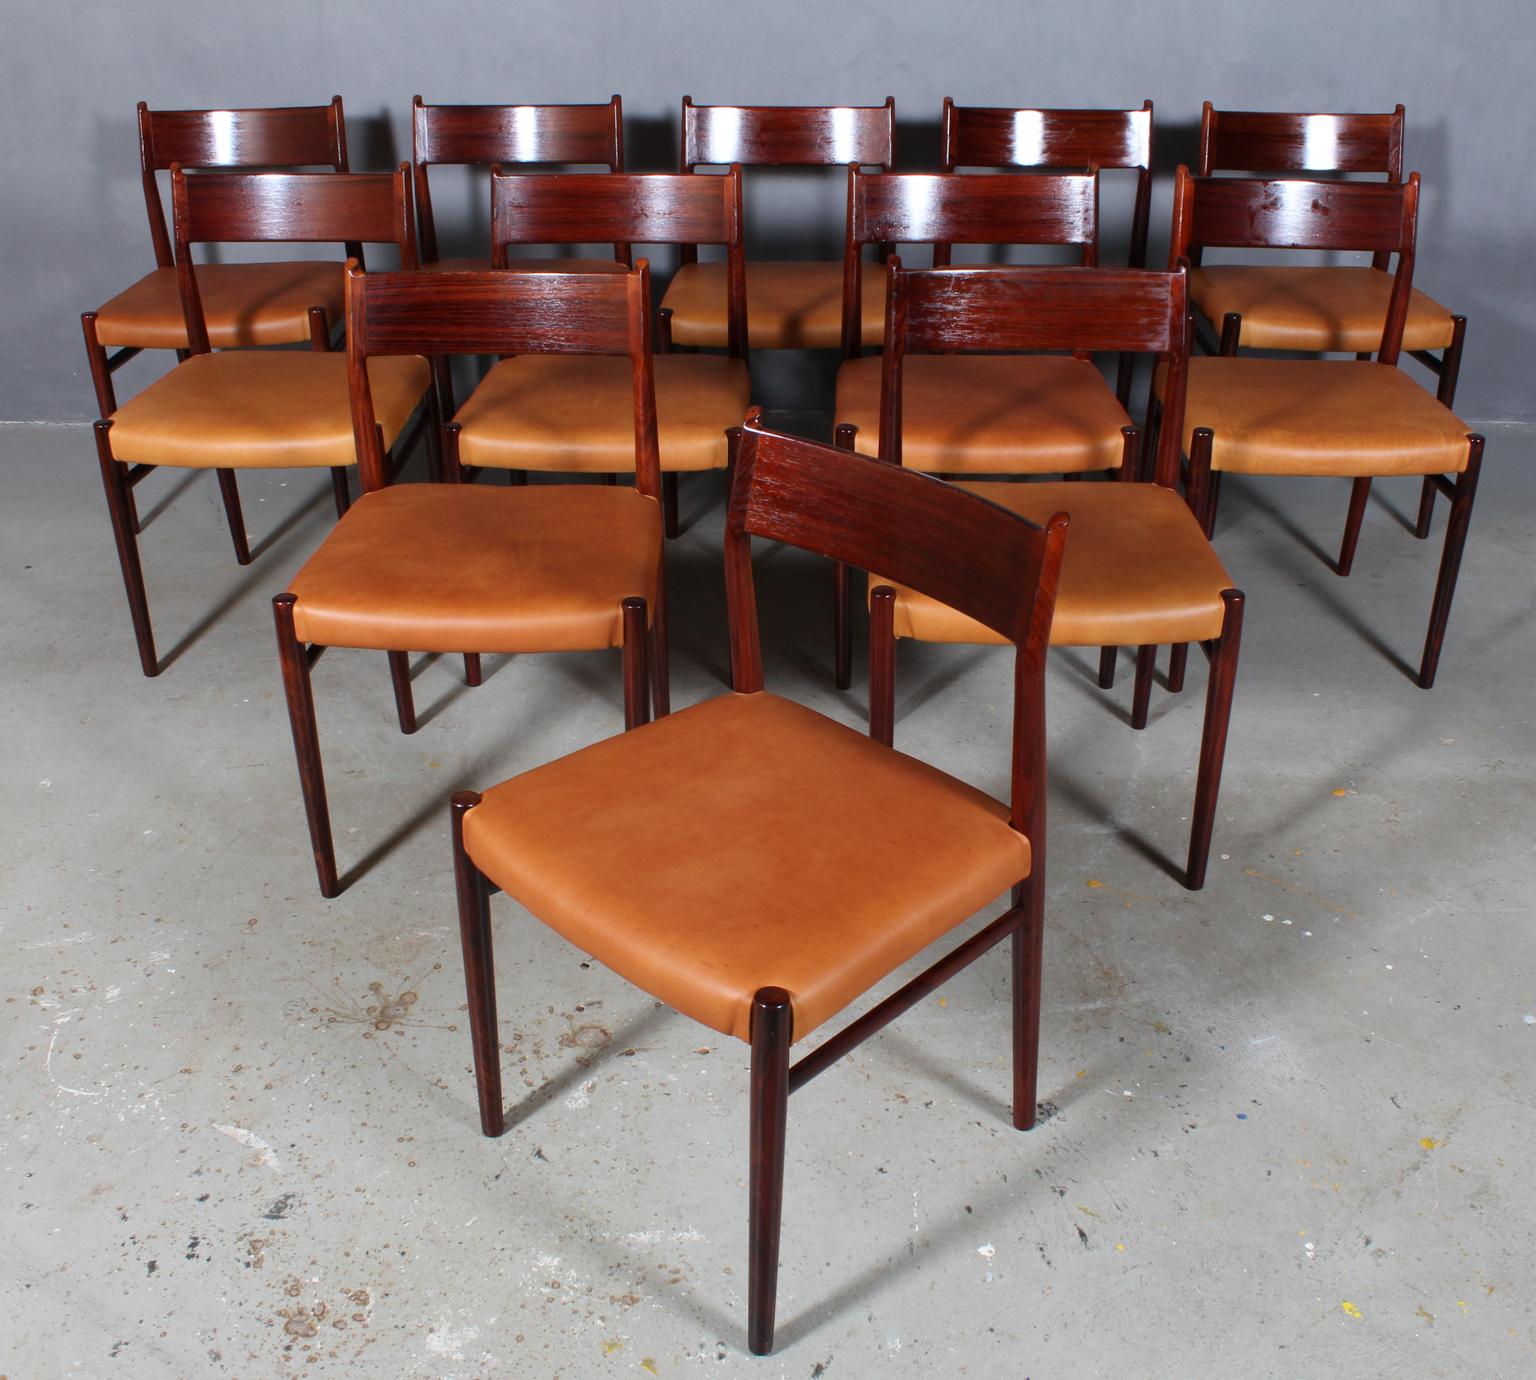 Arne Vodder dining chairs, new upholstered with tan vintage aniline leather.

Frame in partly solid rosewood.

Model 418, made by Sibast.